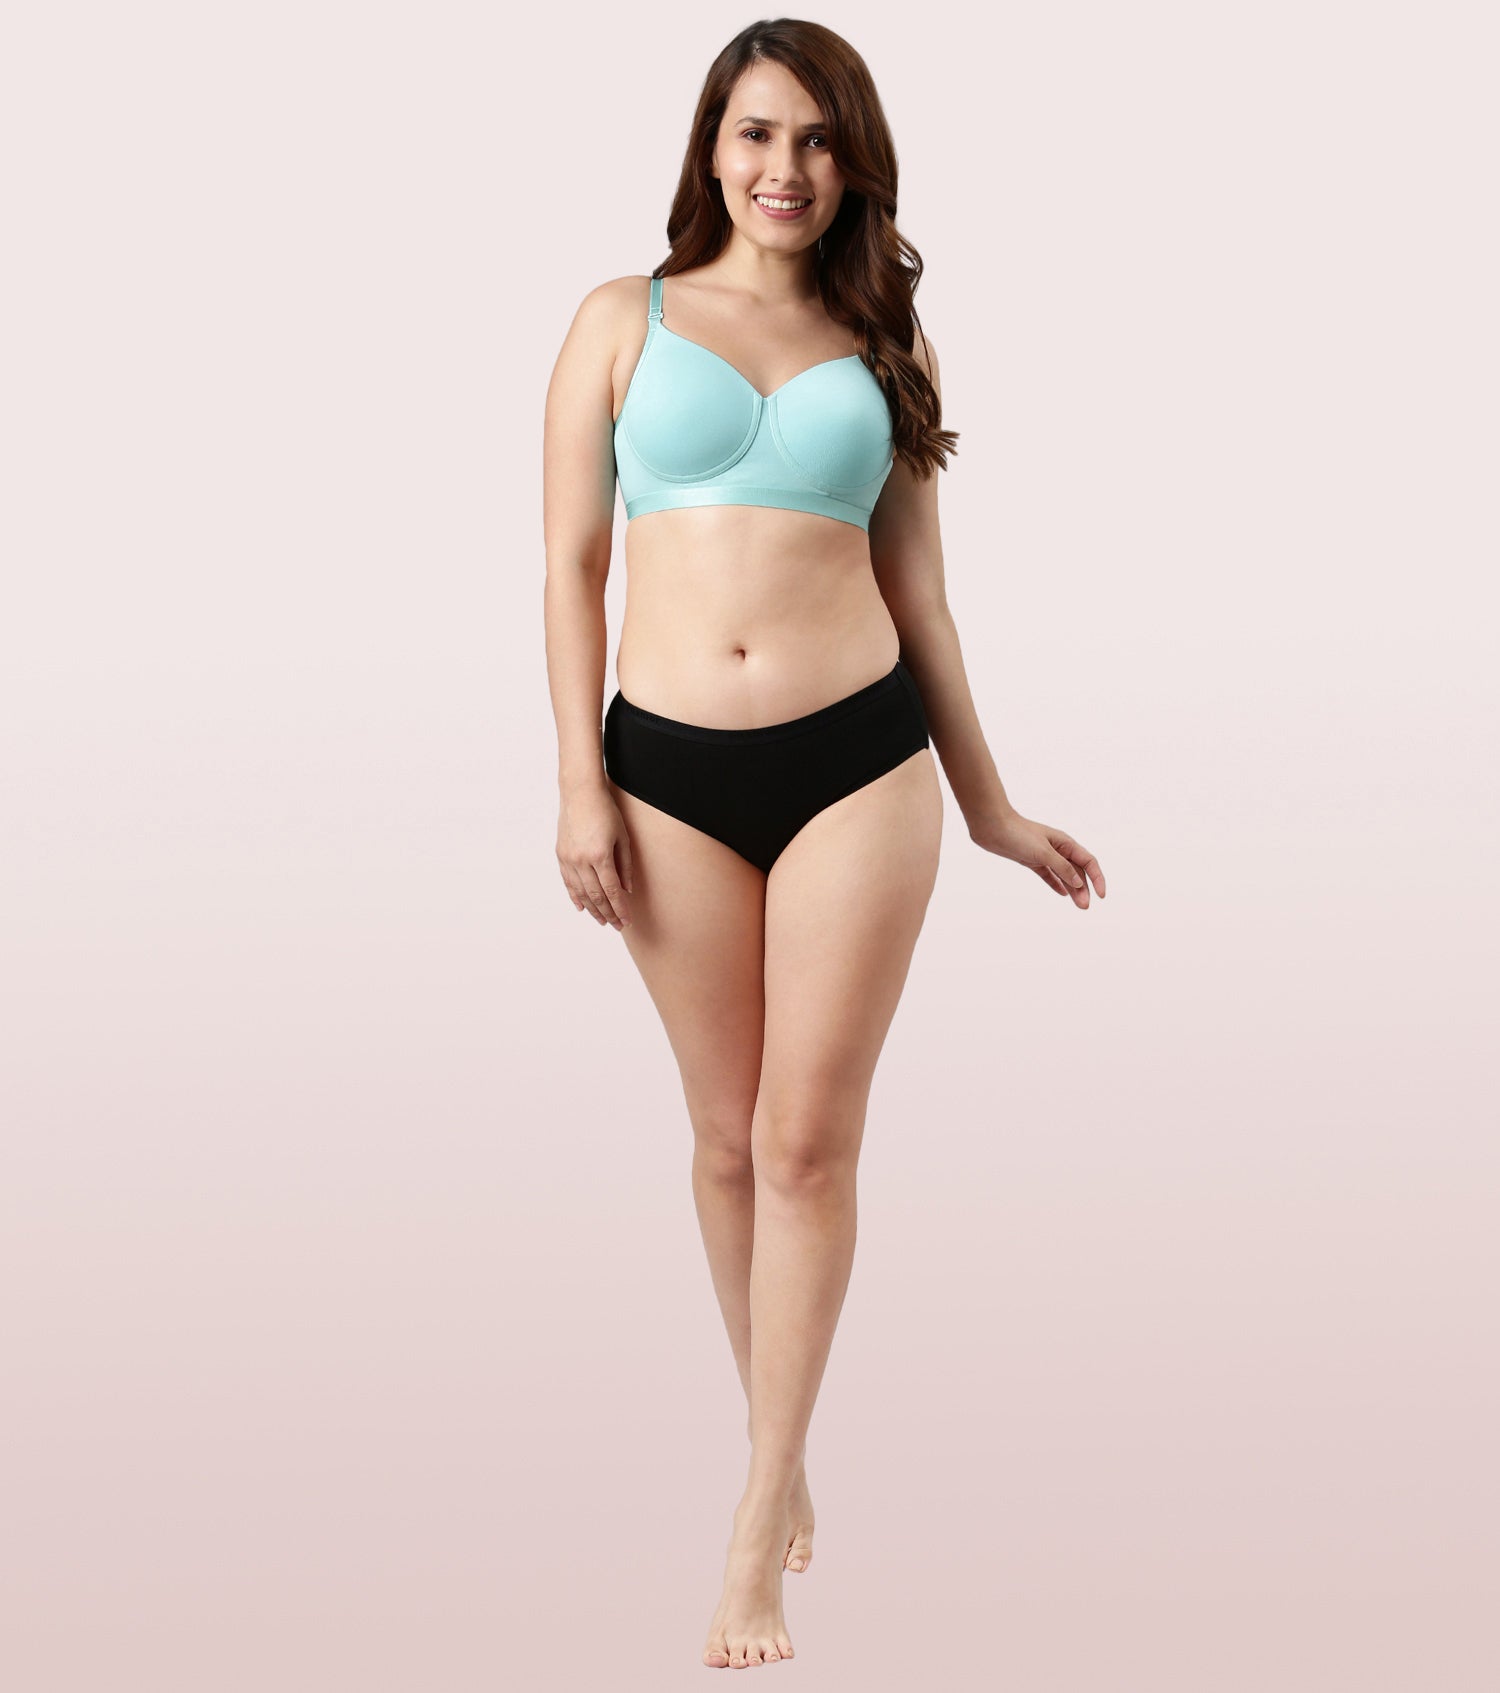 Buy Enamor Padded Non-Wired High Coverage T-Shirt Bra - Wildflower Melody  at Rs.1199 online